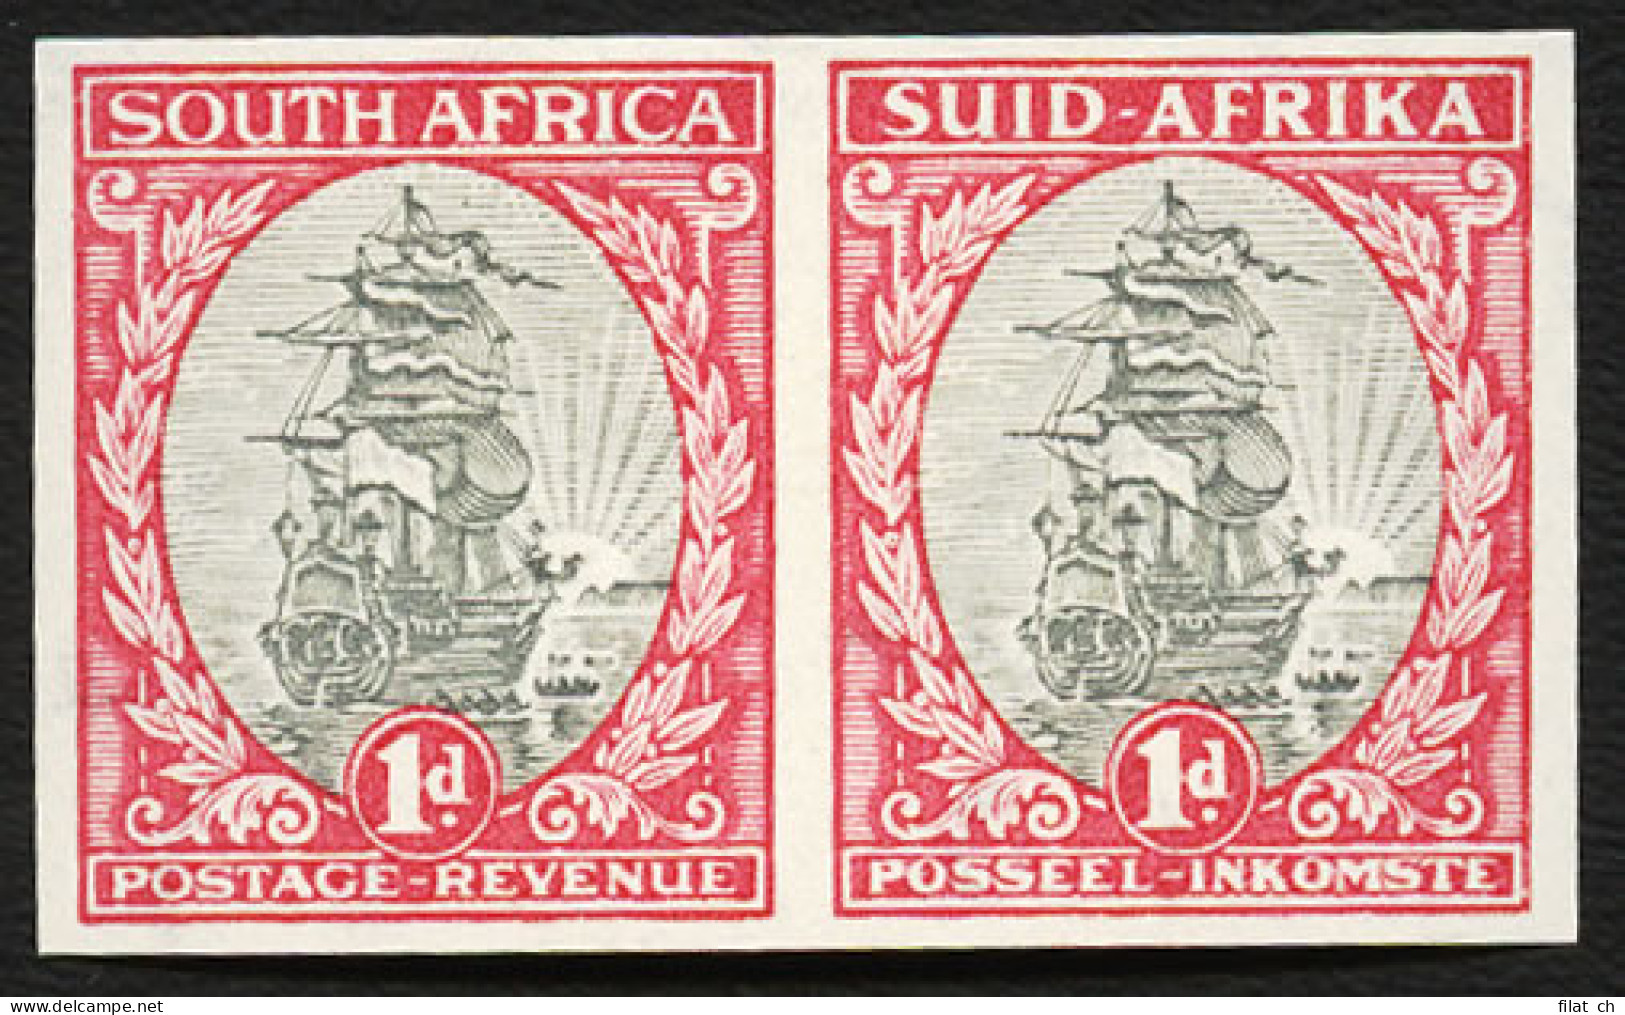 South Africa 1933 1d Imperf Pair, Inv Wmk, VF/M  - Unclassified